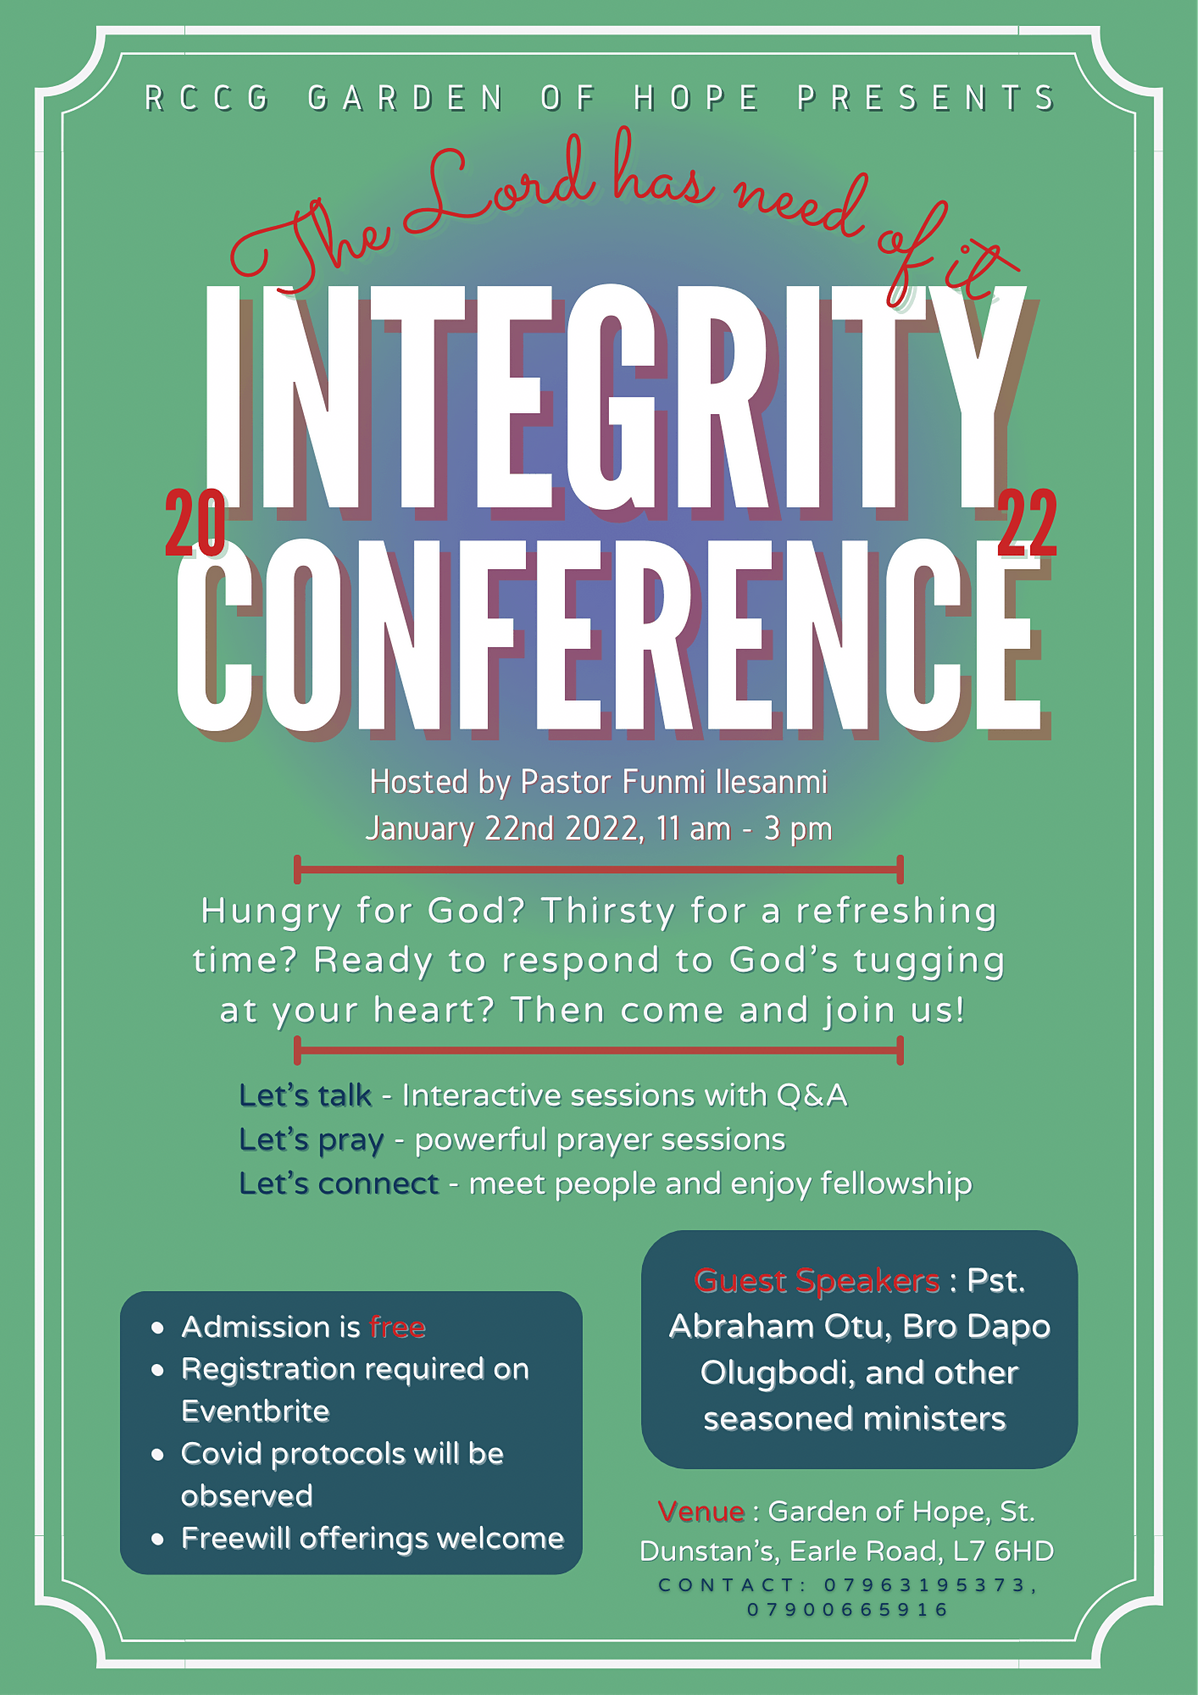 The Integrity Conference 2022